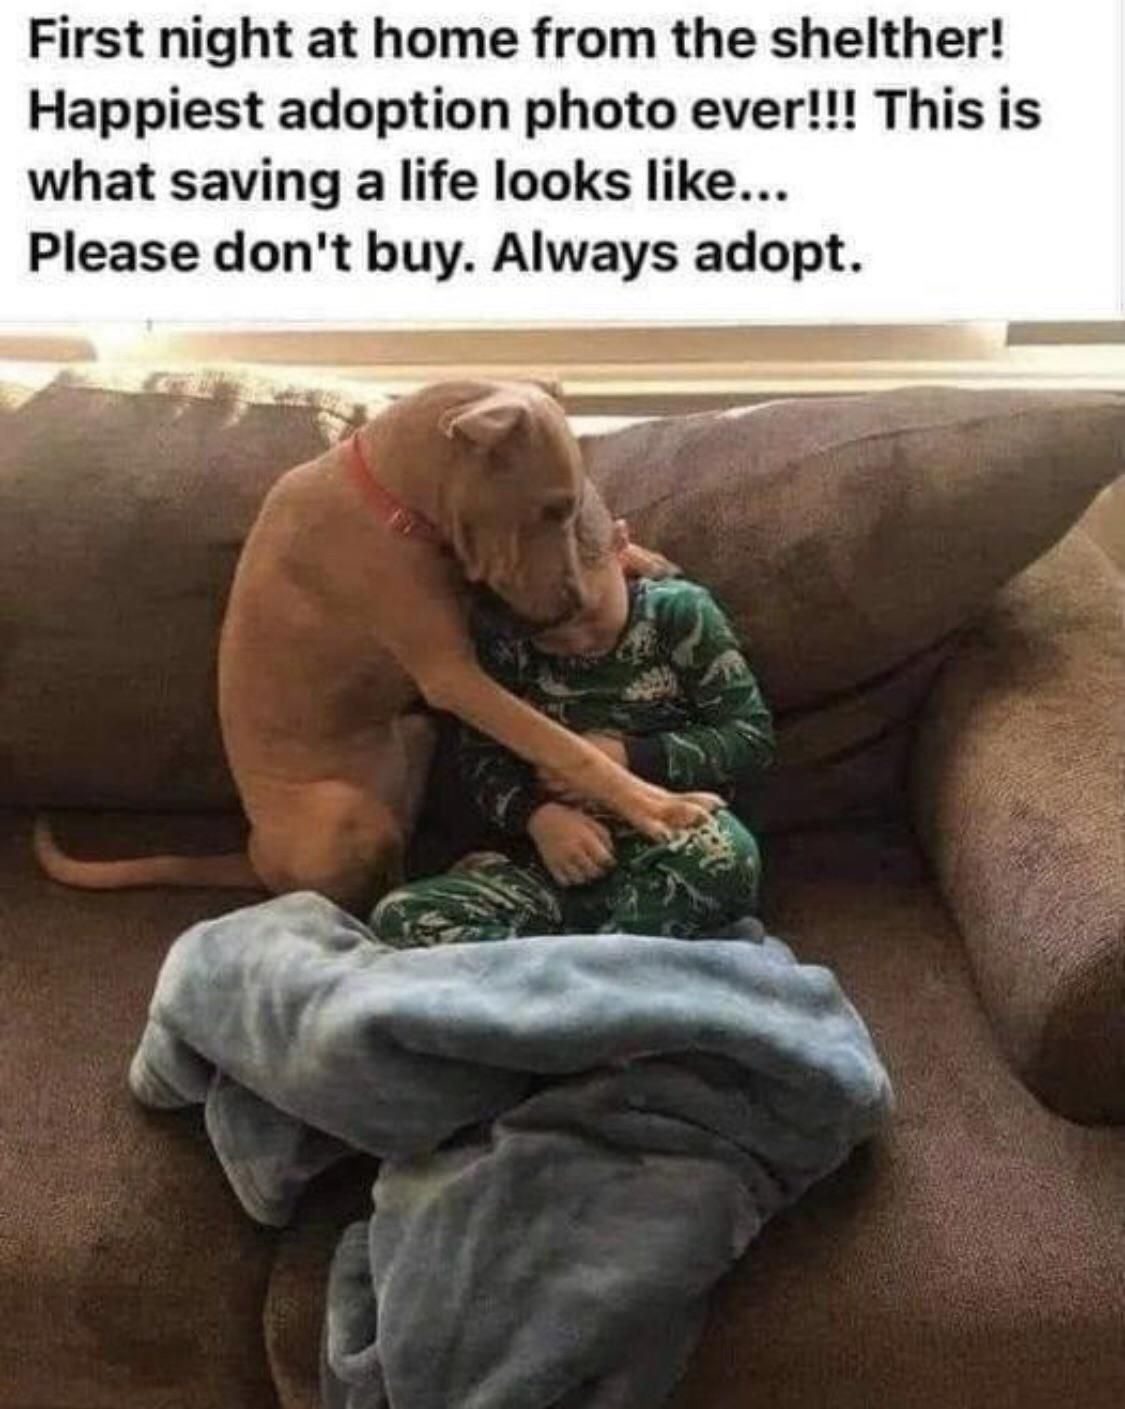 It’s almost as if that kid has lived there the whole time. Even the dog is accepting of him.